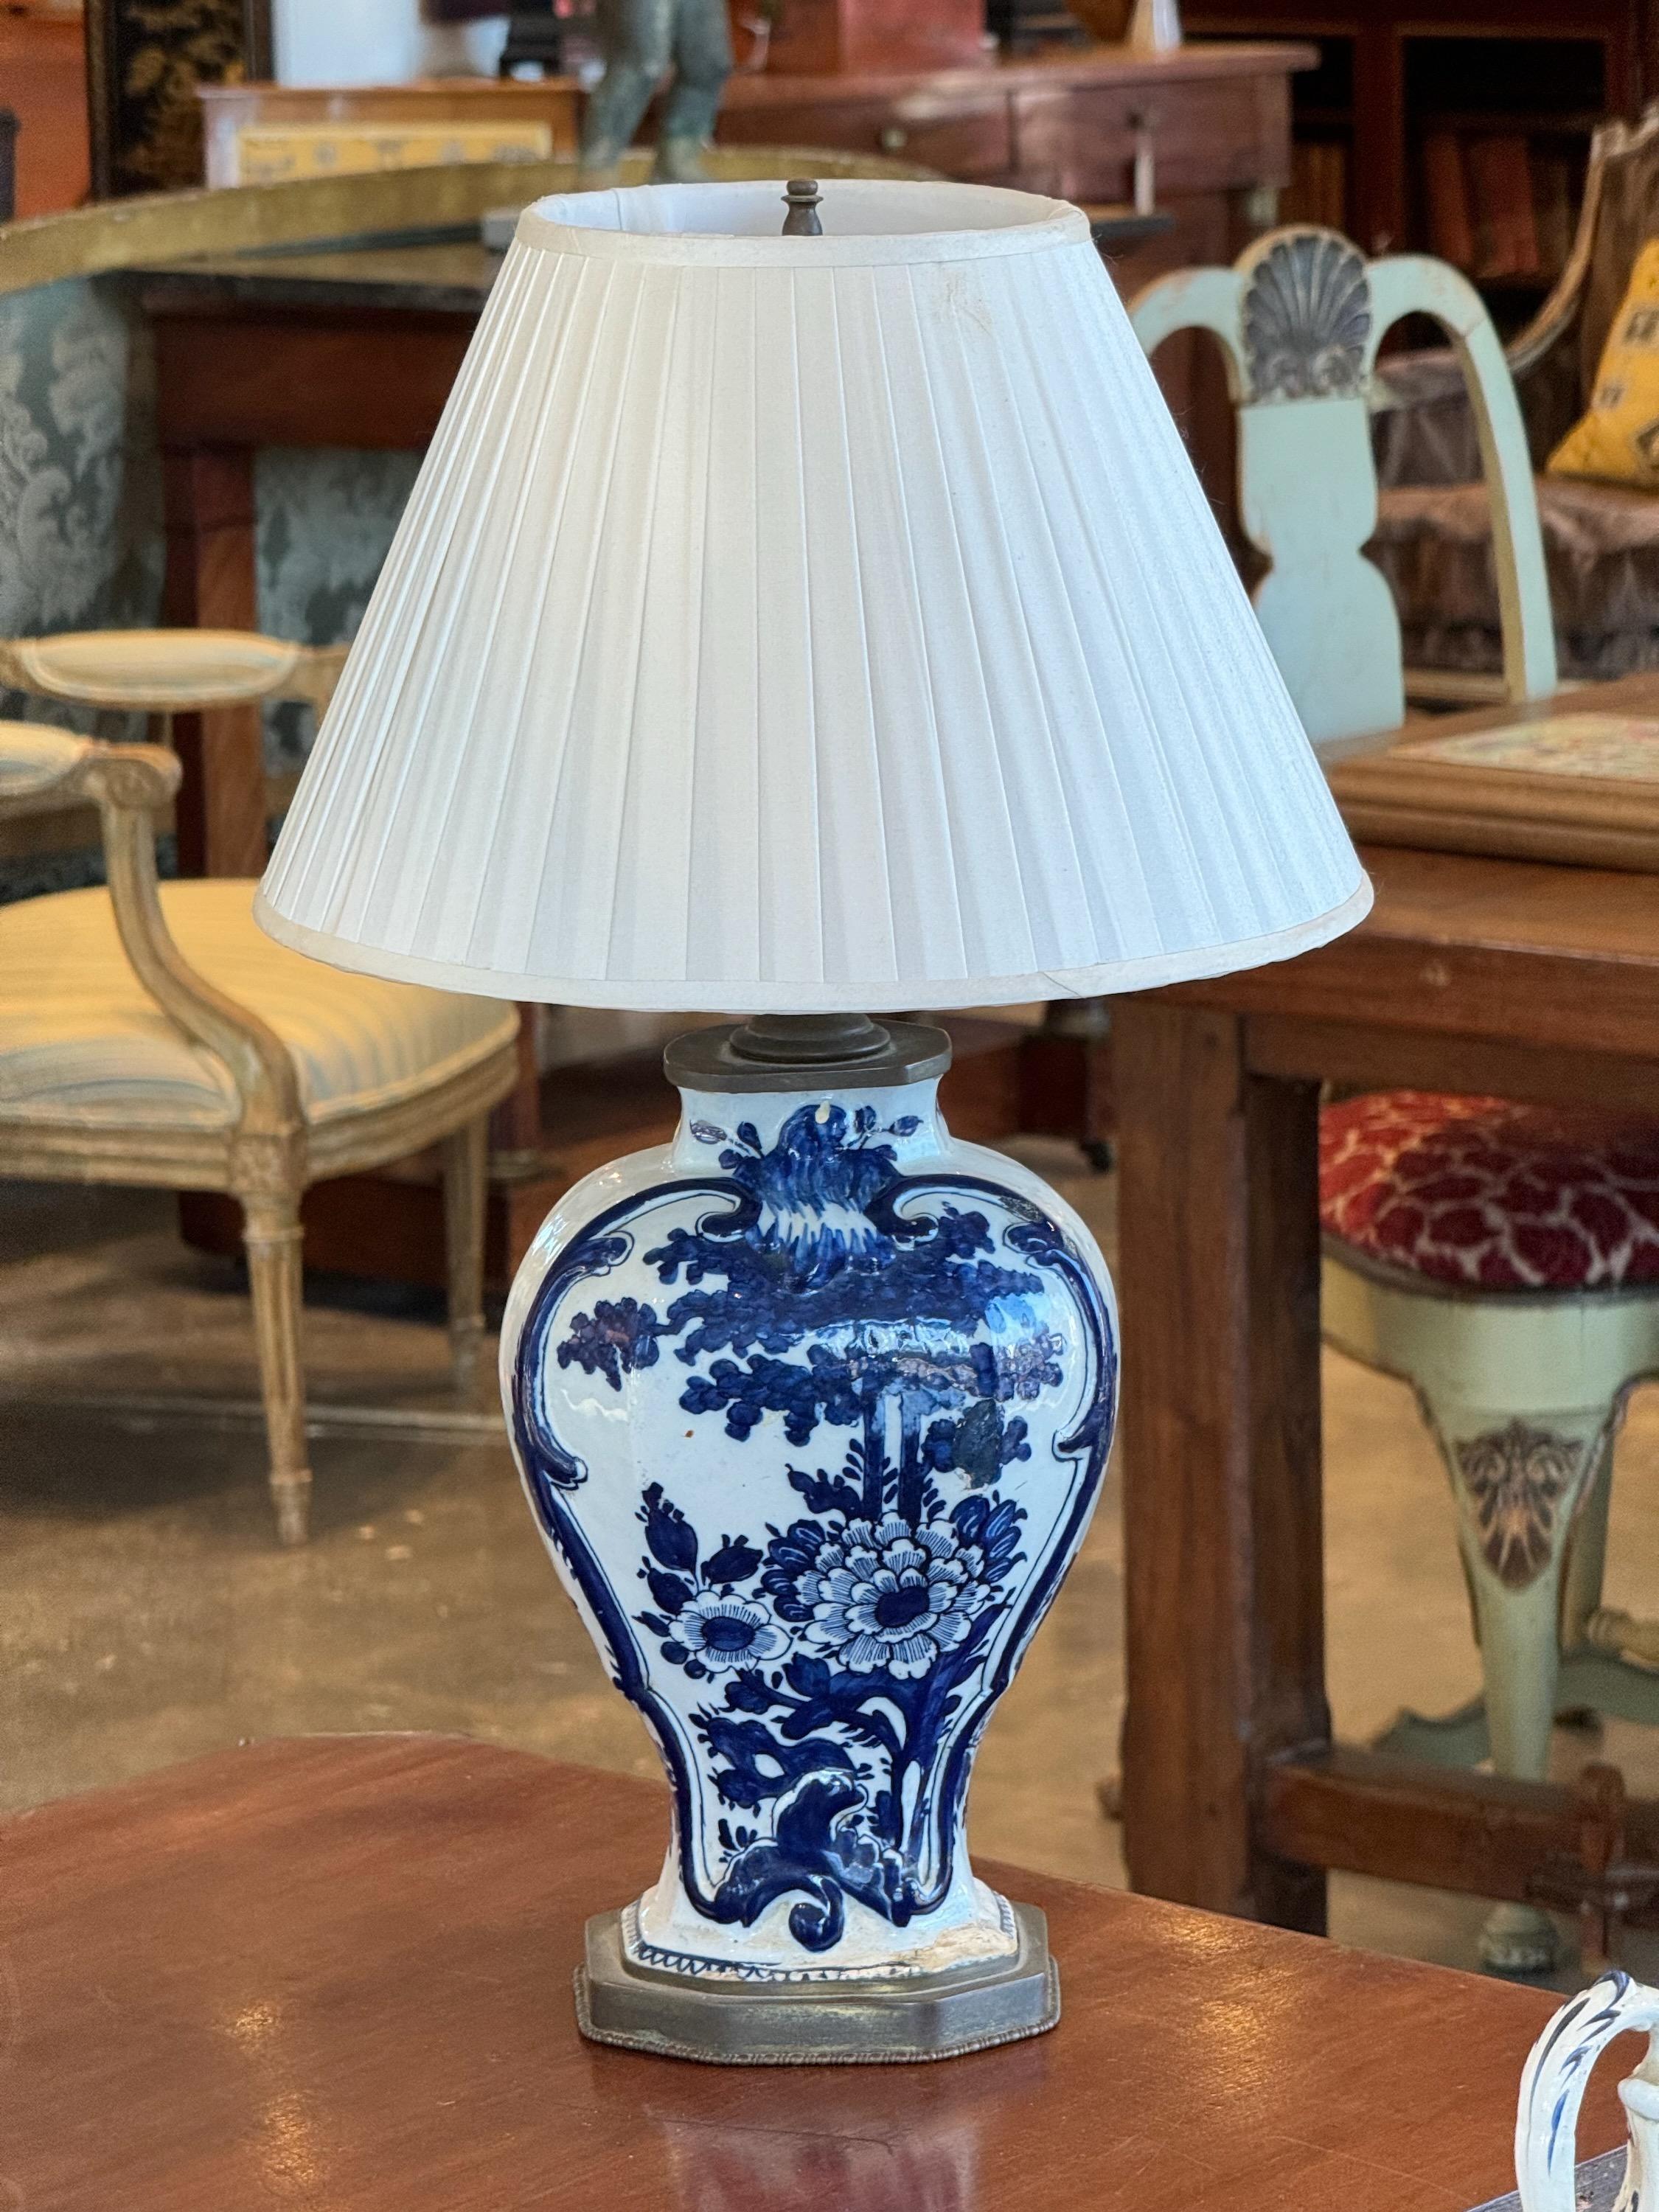 A great delft vase that has been converted to a lamp. Made in the Mid 18th Century